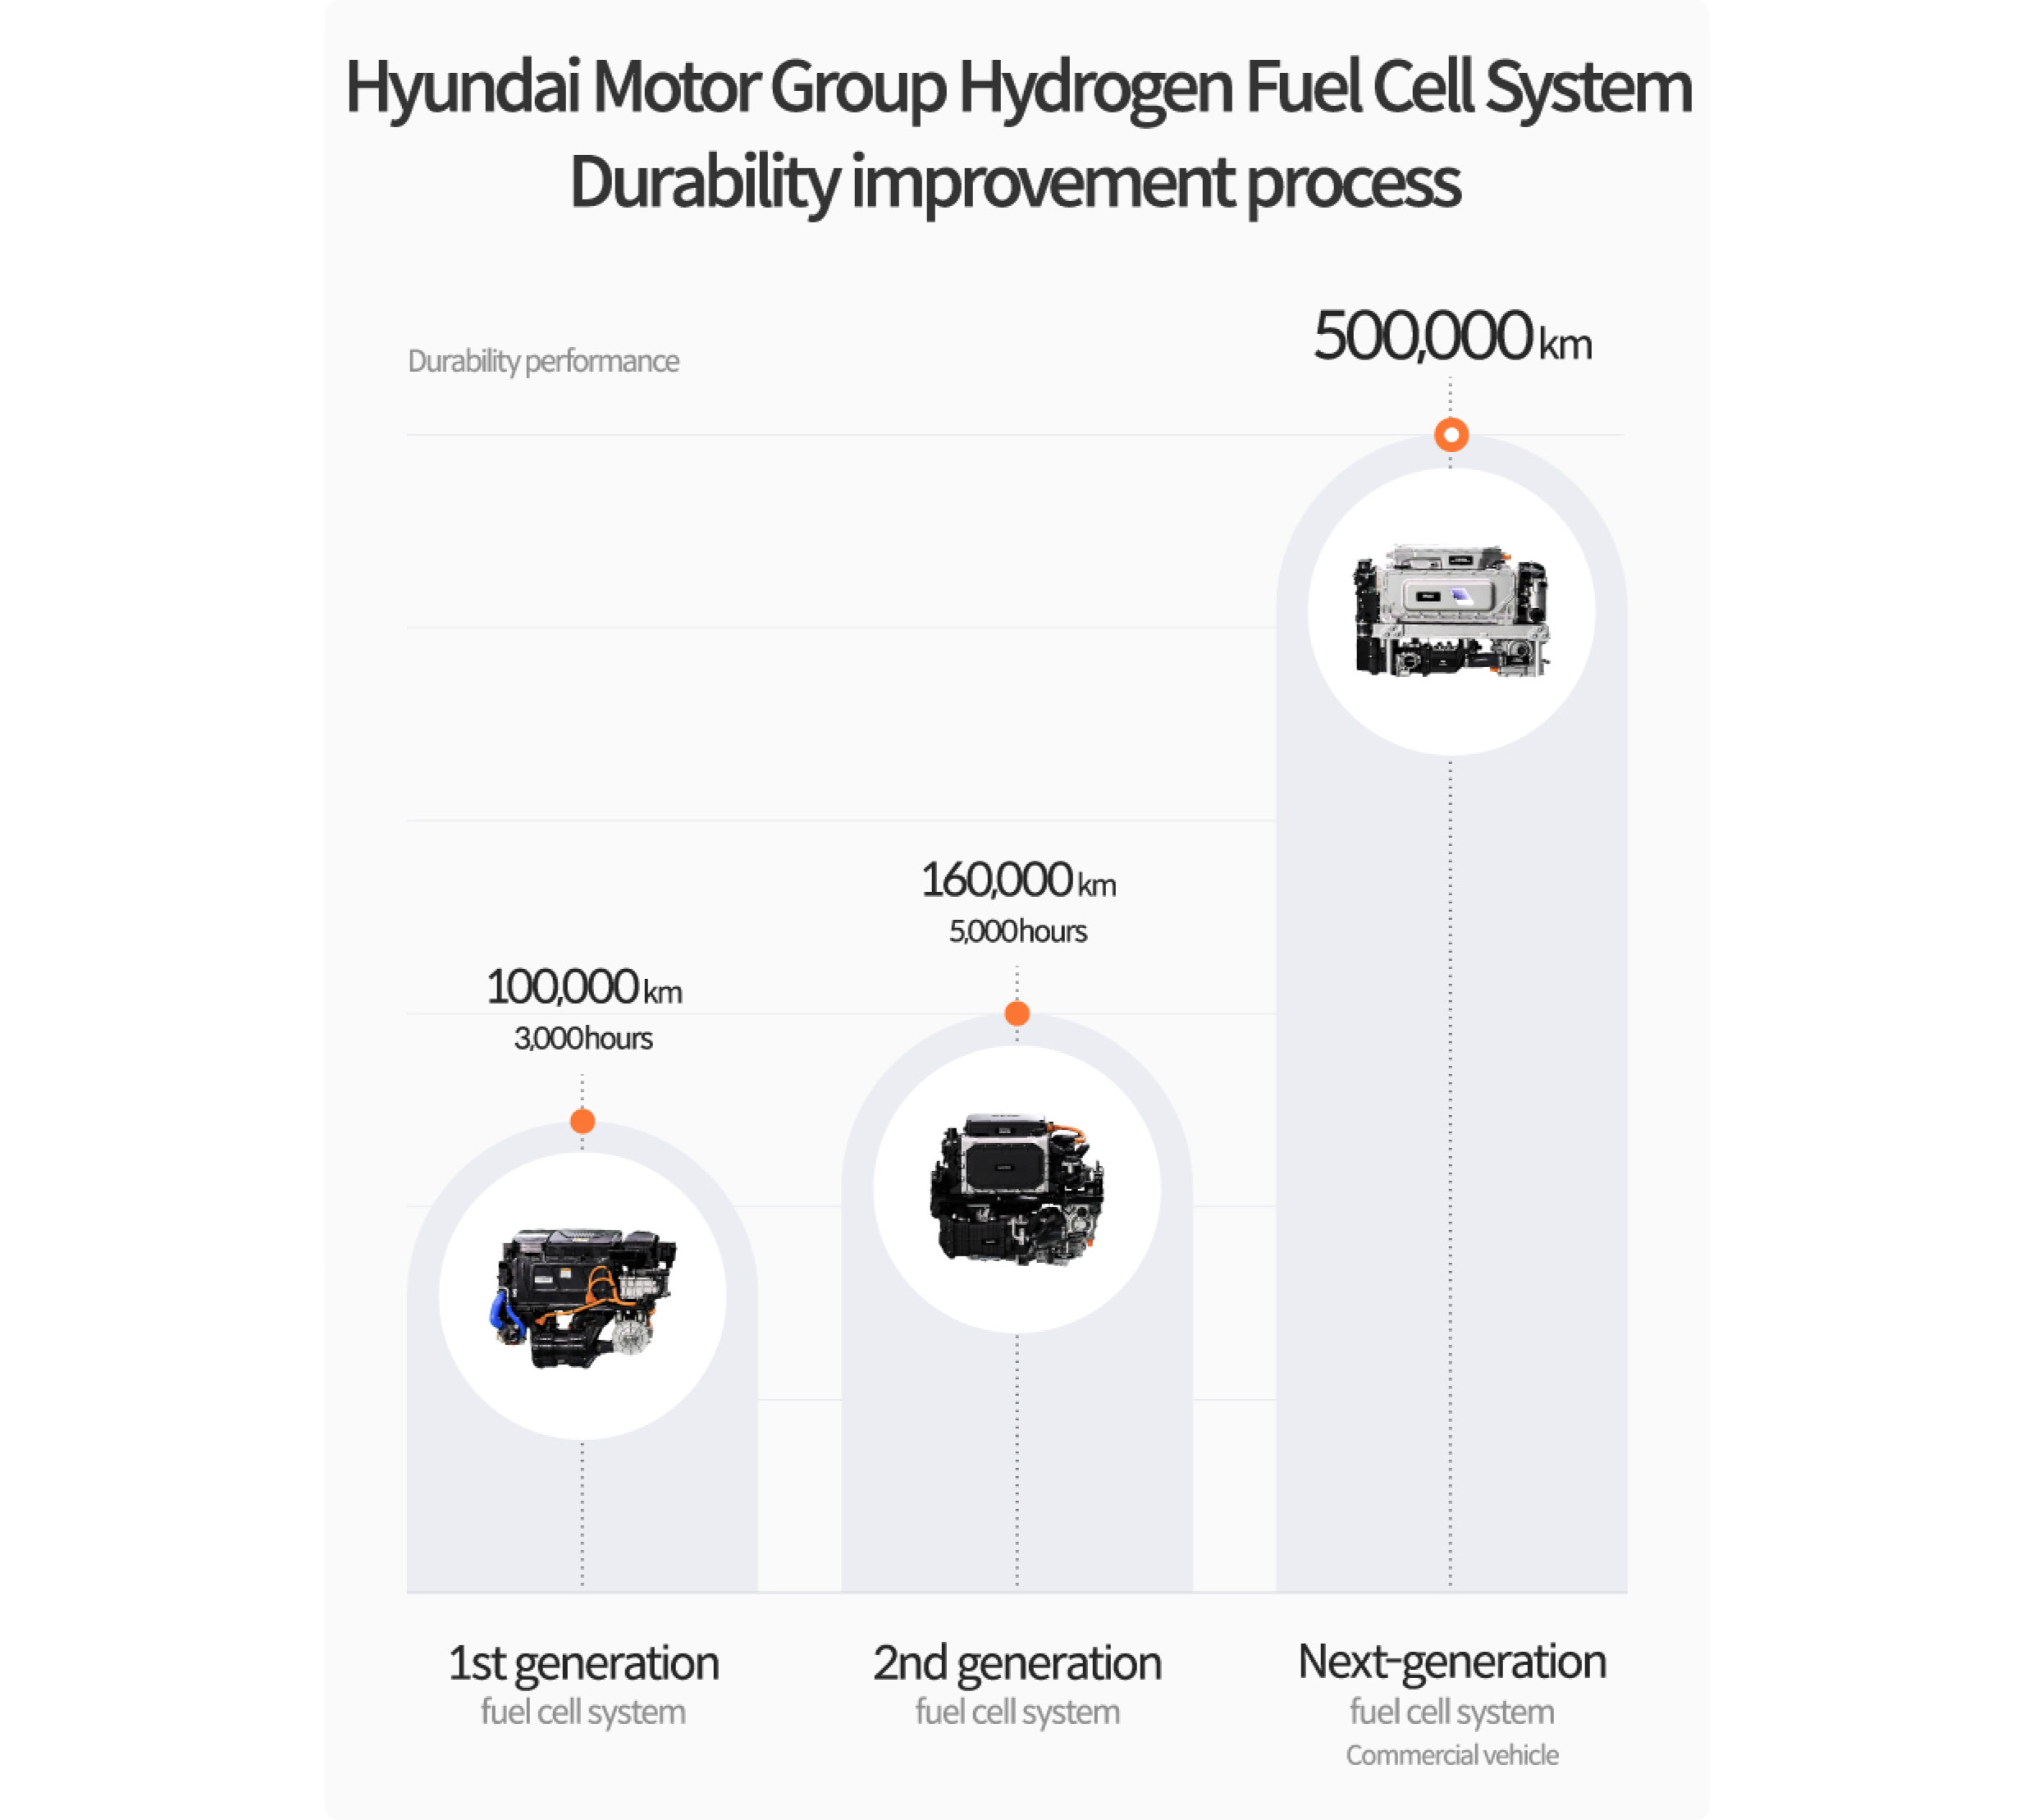 Development Process of Hydrogen Fuel Cell System Durability in Hyundai Motor Group